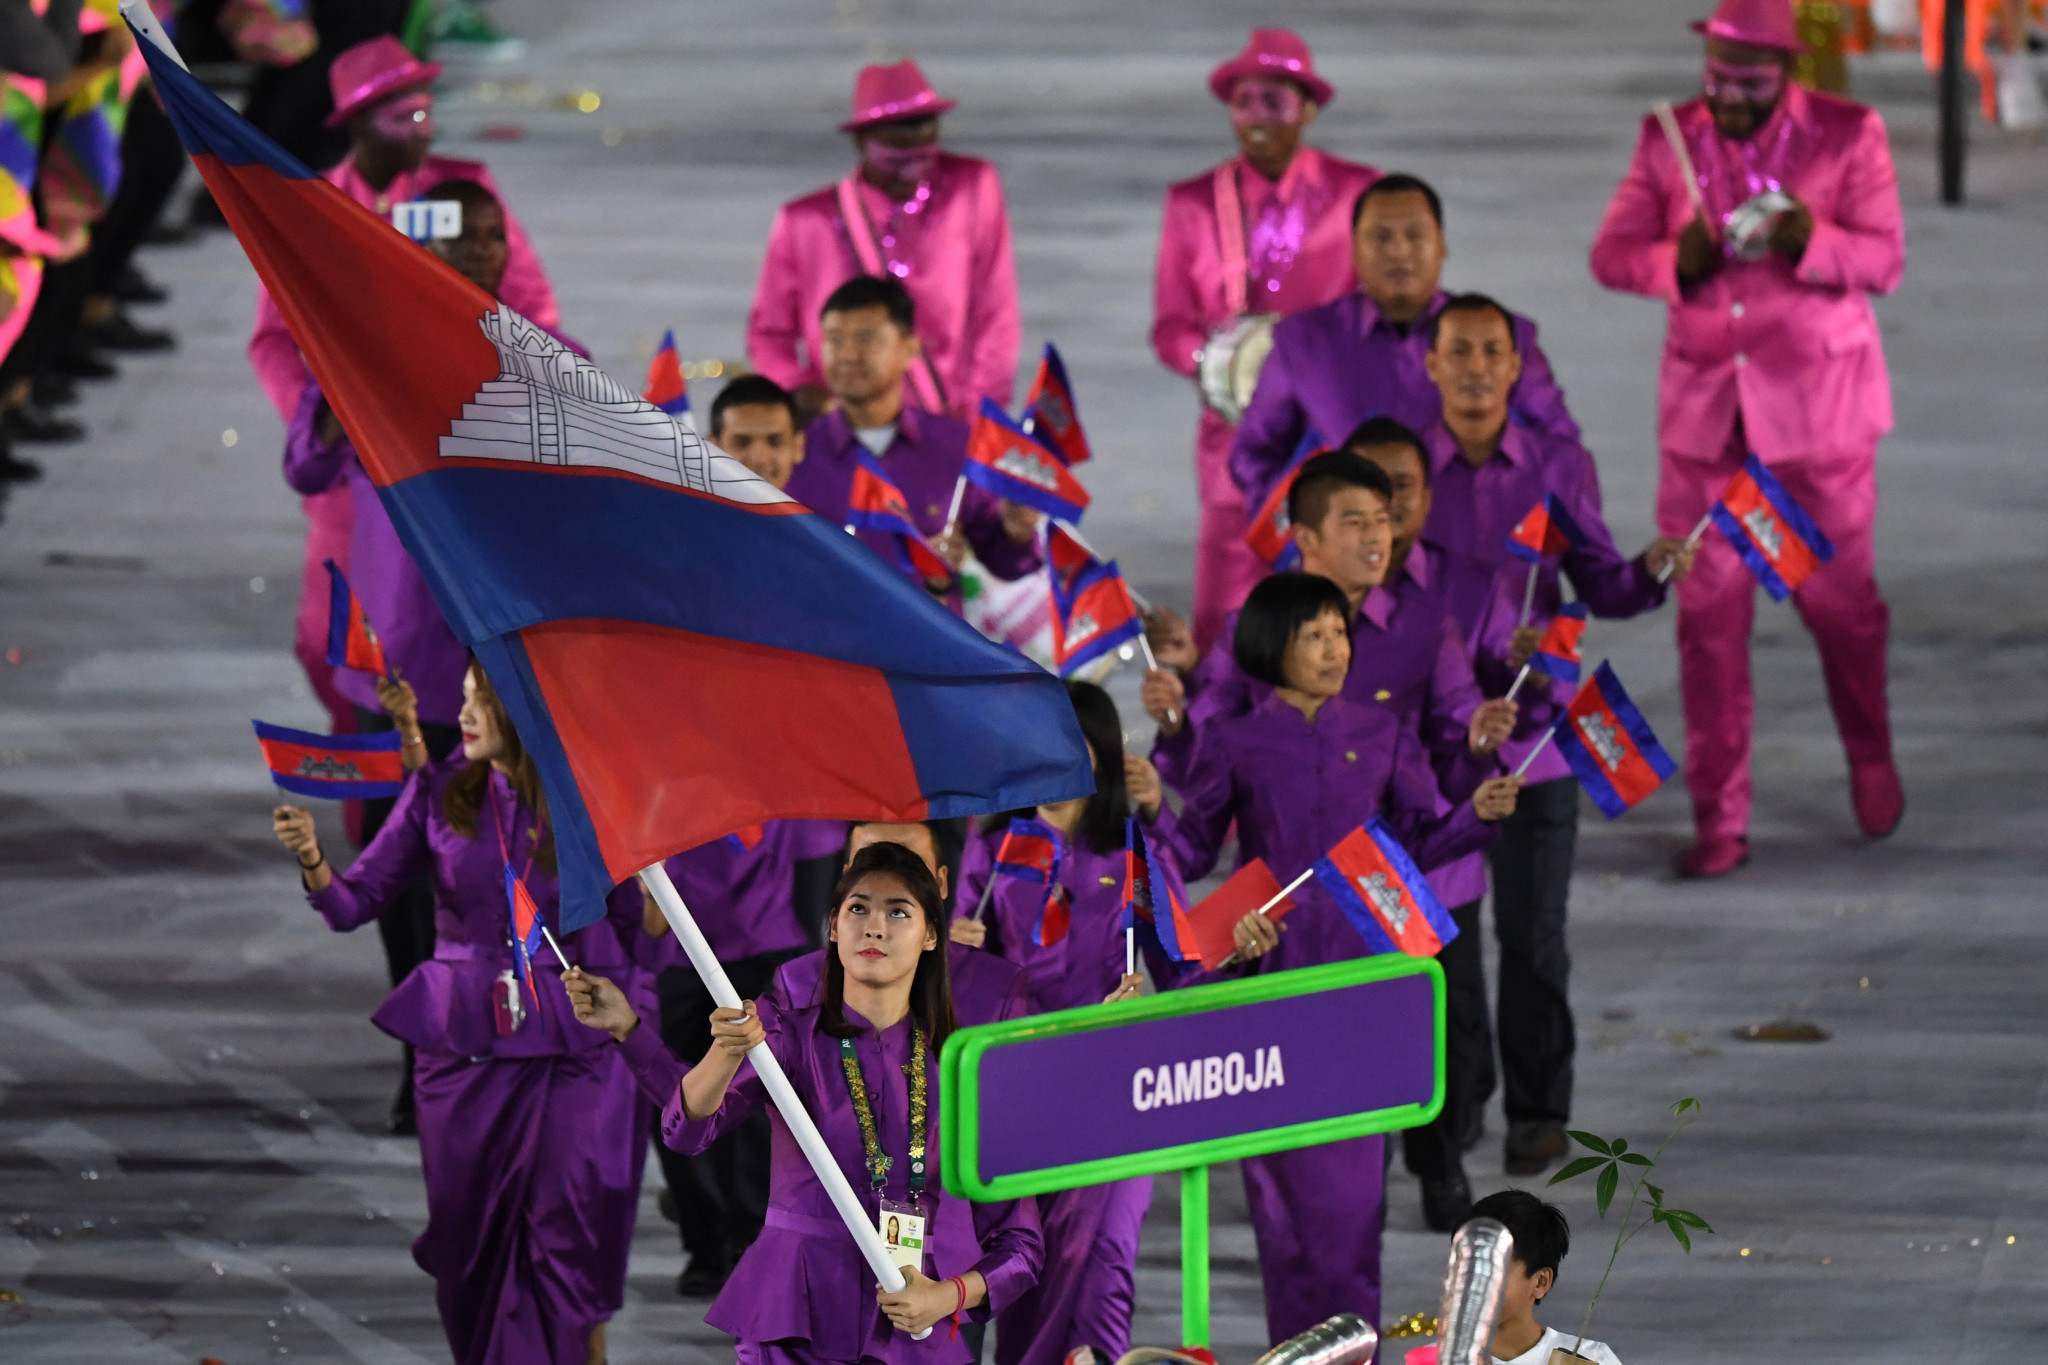 Sorn Seavmey was the flag bearer for Cambodia at the Parade of Nations before Rio 2016 ©Getty Images